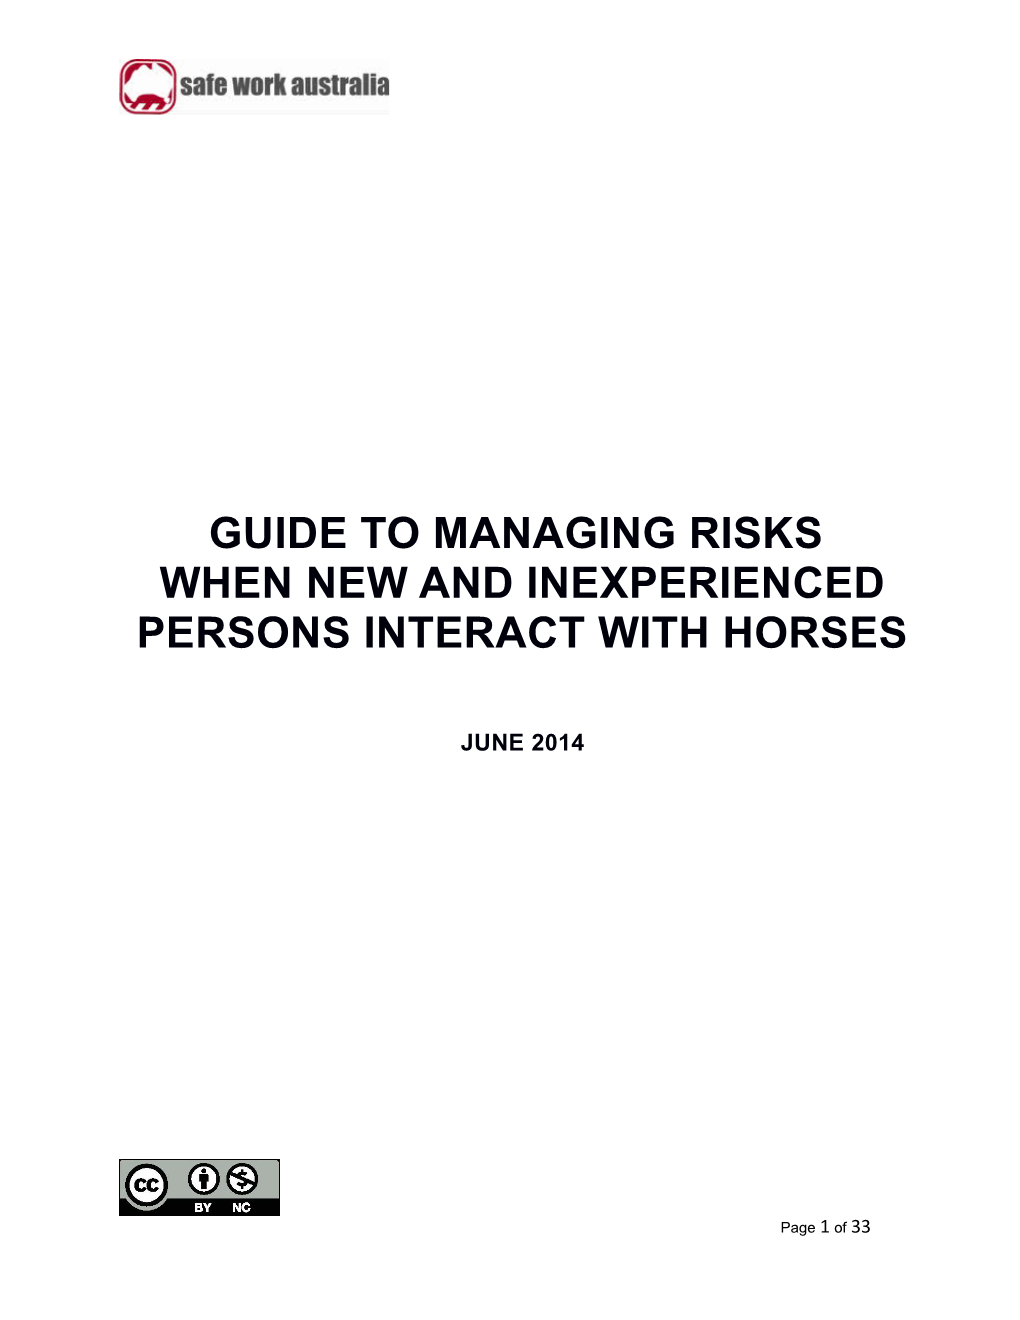 Guide to Managing Risks When New and Inexperienced Persons Interact with Horses